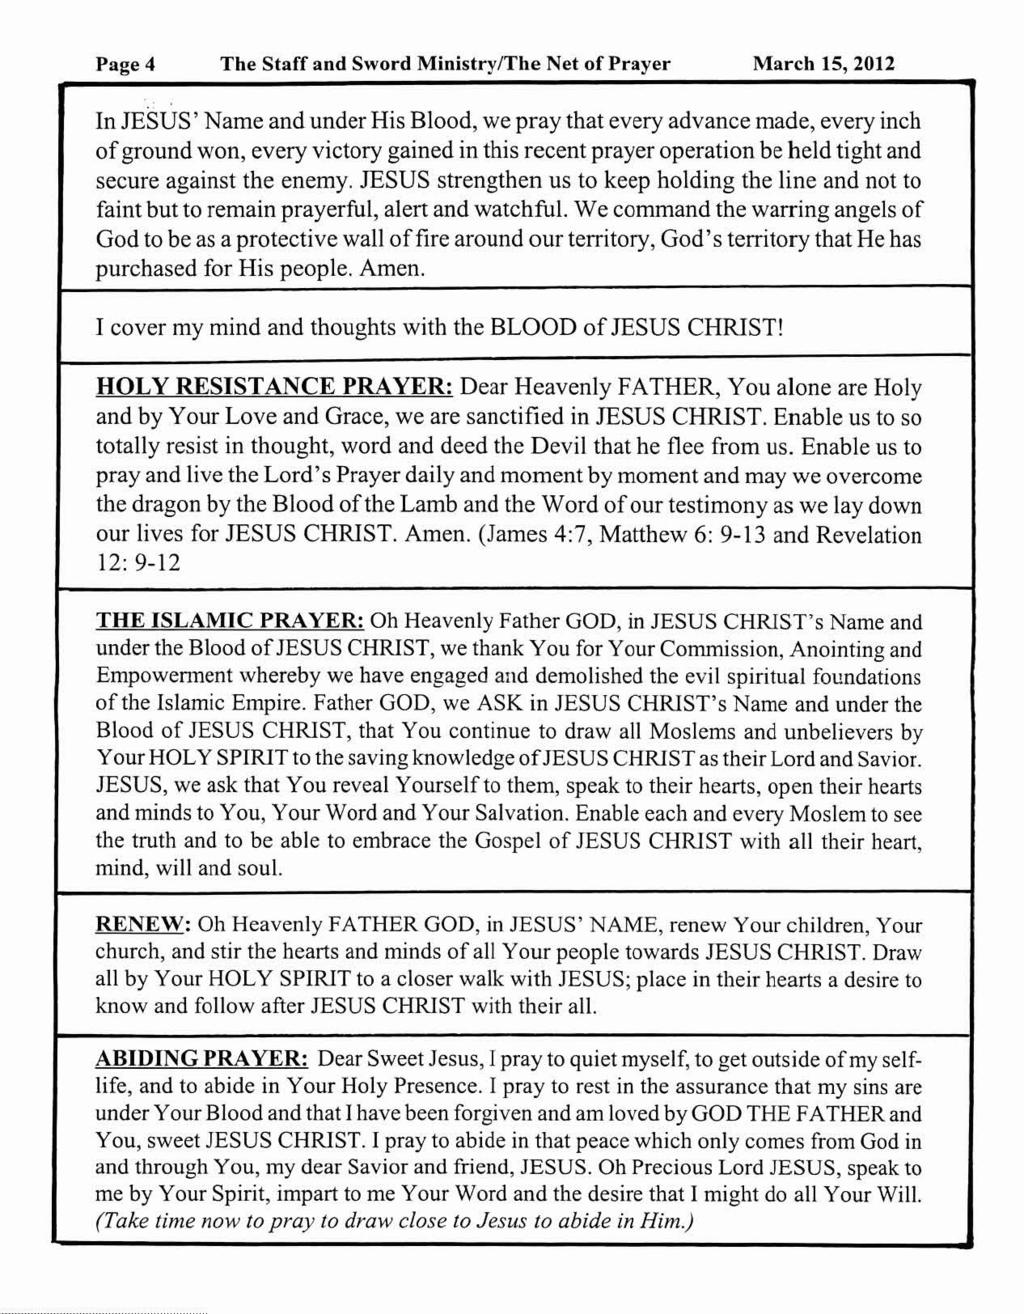 Page 4 The Staff and Sword Ministry/The Net of Prayer March 15, 2012 In JESUS Name and under His Blood, we pray that every advance made, every inch of ground won, every victory gained in this recent